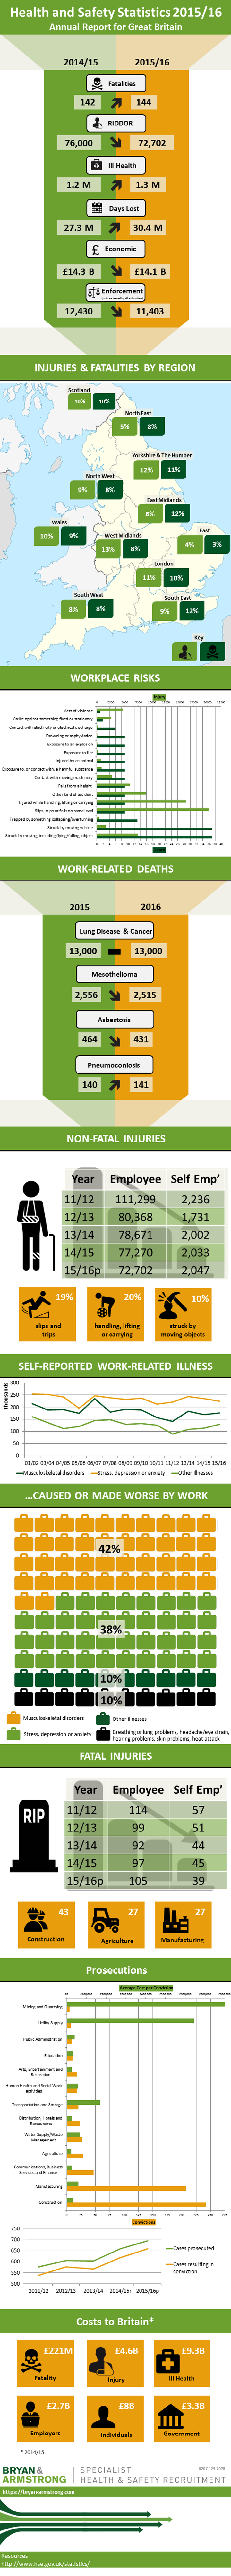 hse-annual-health-and-safety-stats-2015-16